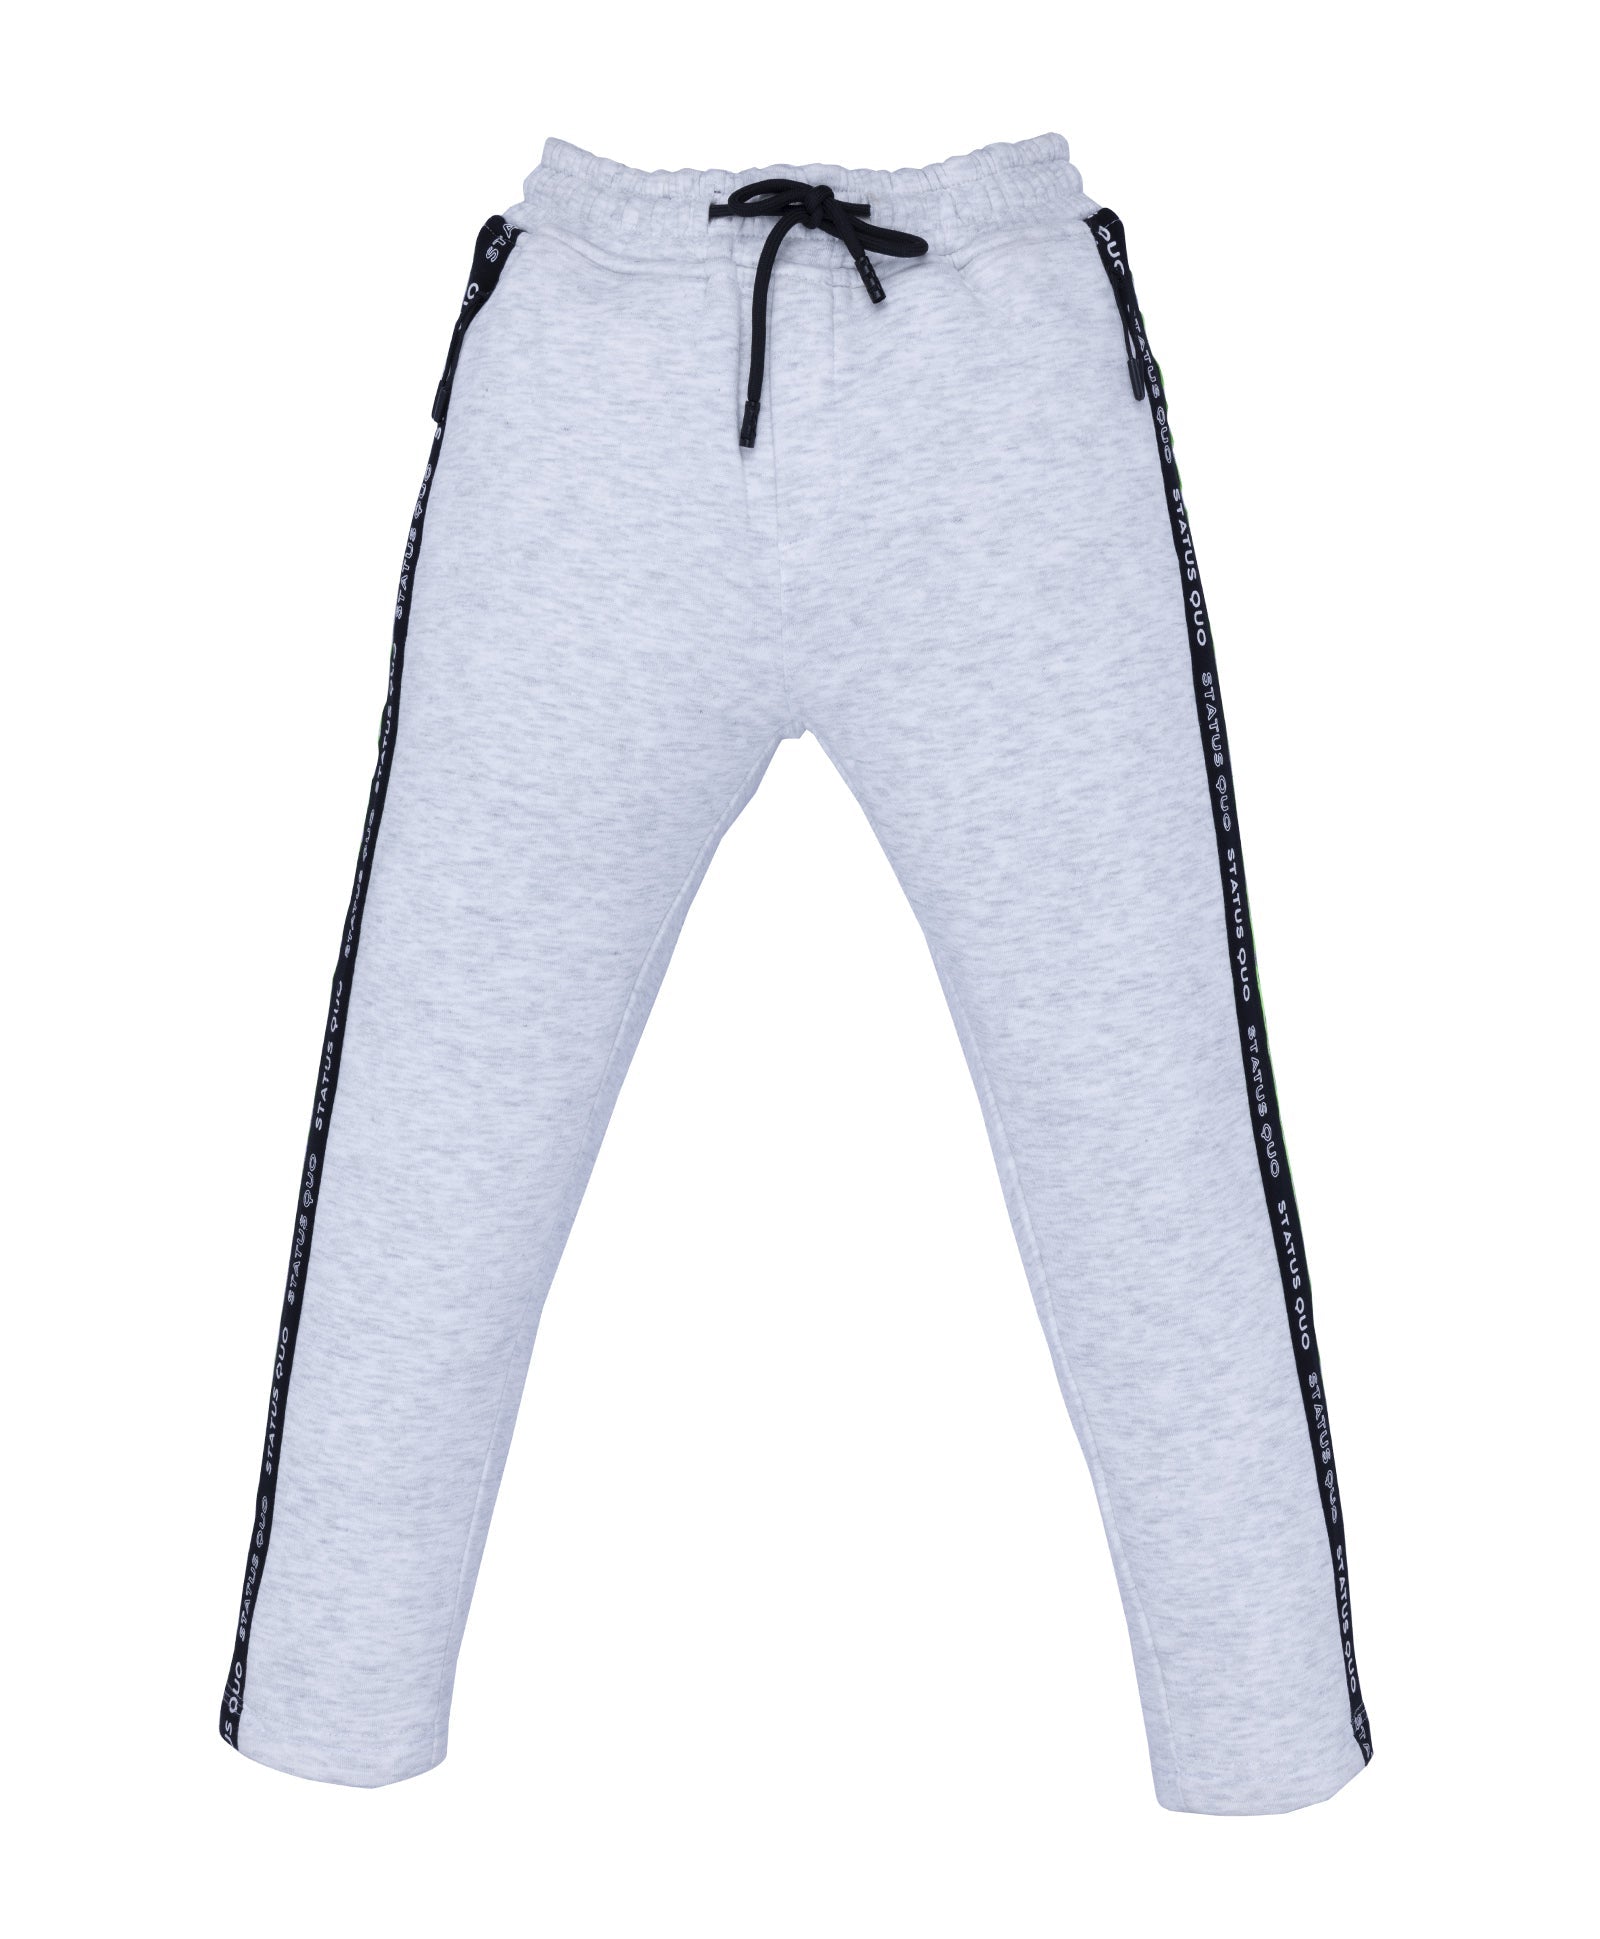 track pants for boys